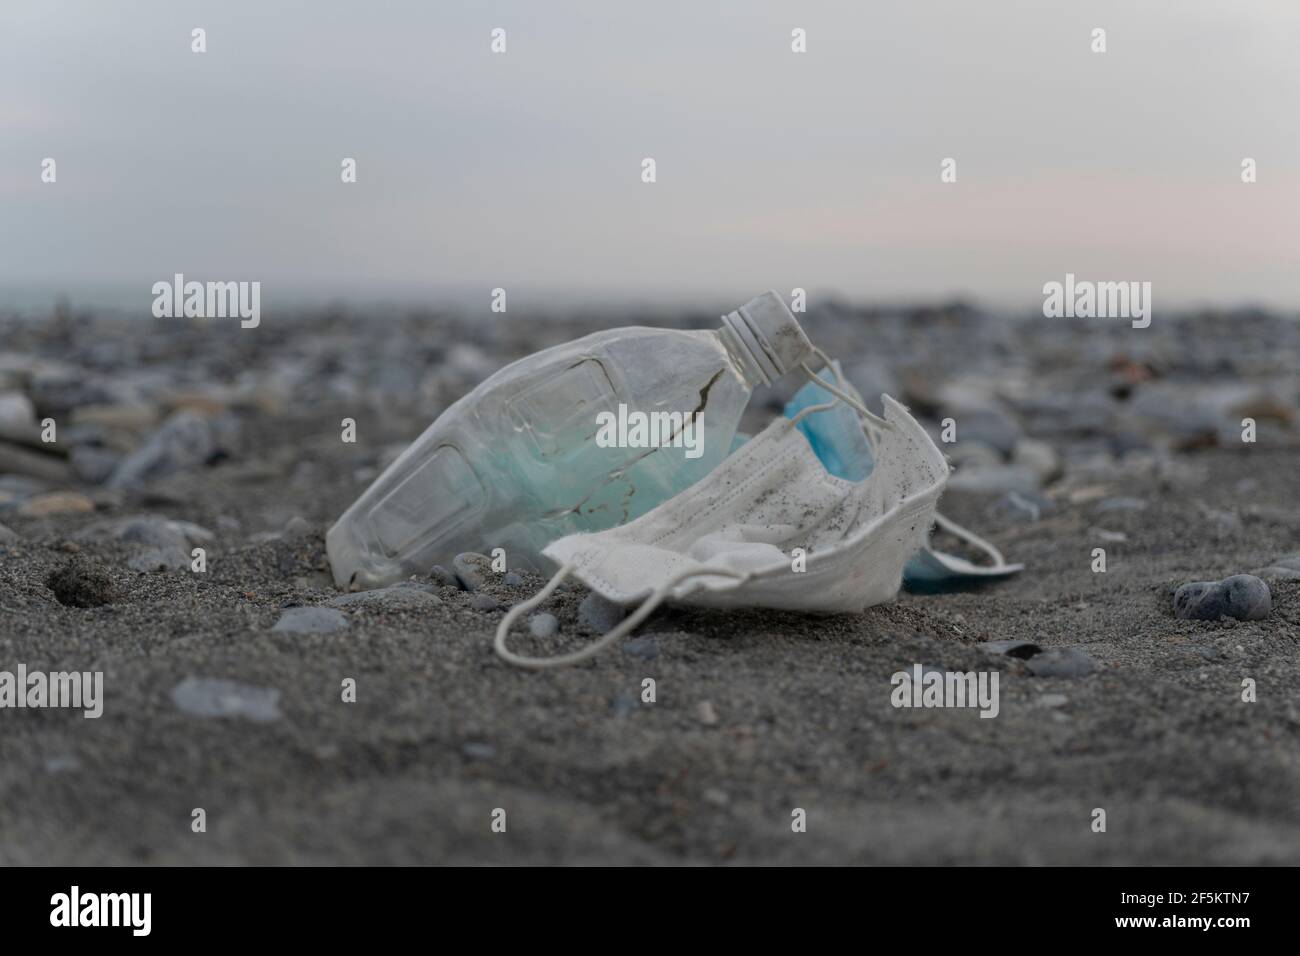 Pollution on the beach, plastic including bottles, surgical masks and other garbage Stock Photo